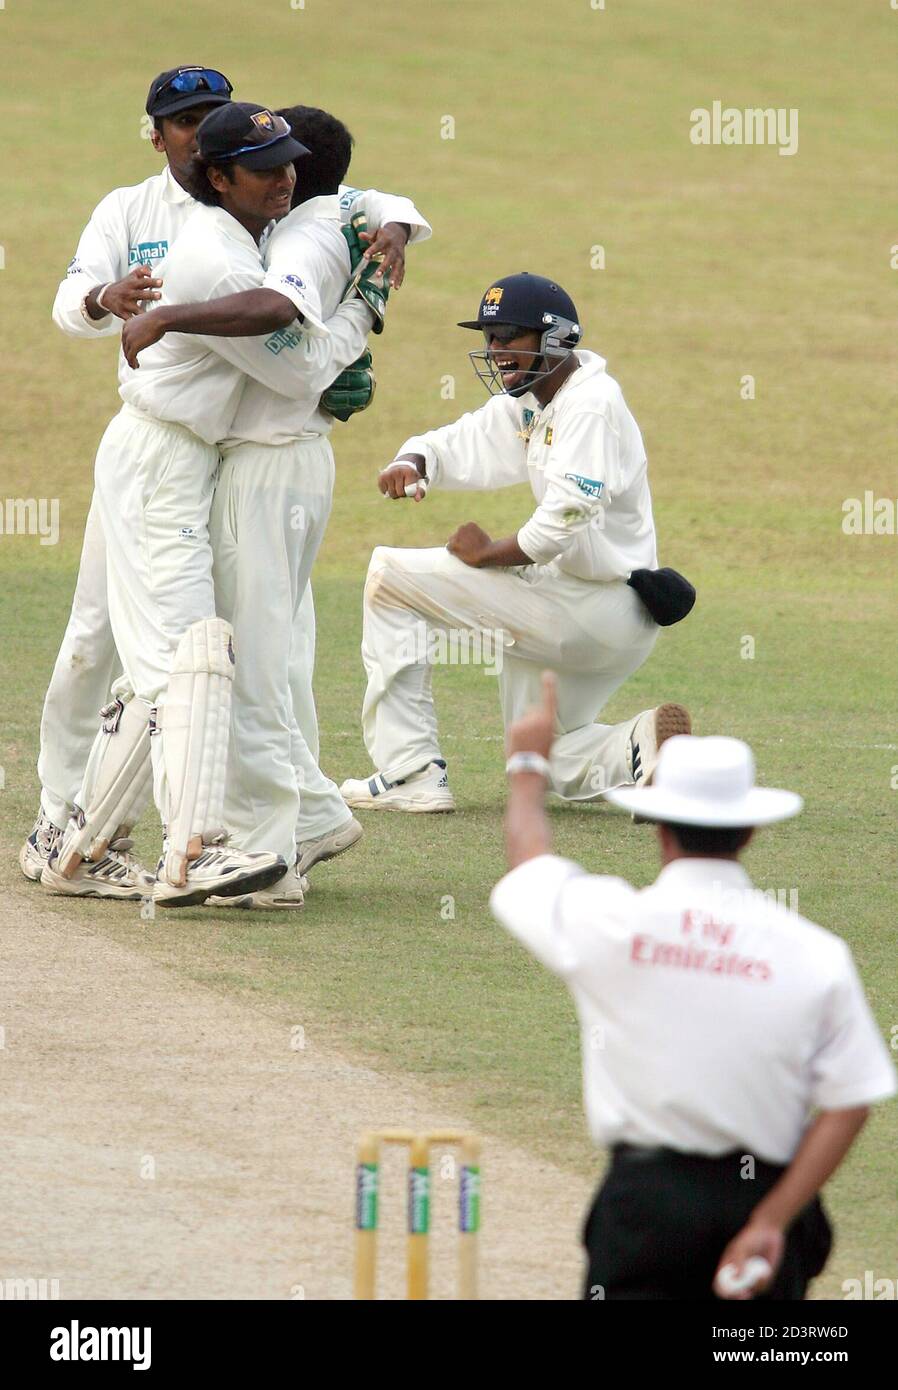 Sri Lankan spinner Muttiah Muralitharan (3rd from left) is congratulated by teammates as umpire Aleem Dar raises his finger to rule England opener Marcus Trescothick out during England's first innings of the second test match against Sri Lanka in Kandy on December, 11, 2003. REUTERS/Anuruddha Lokuhapuarachchi  AL/TW Stock Photo